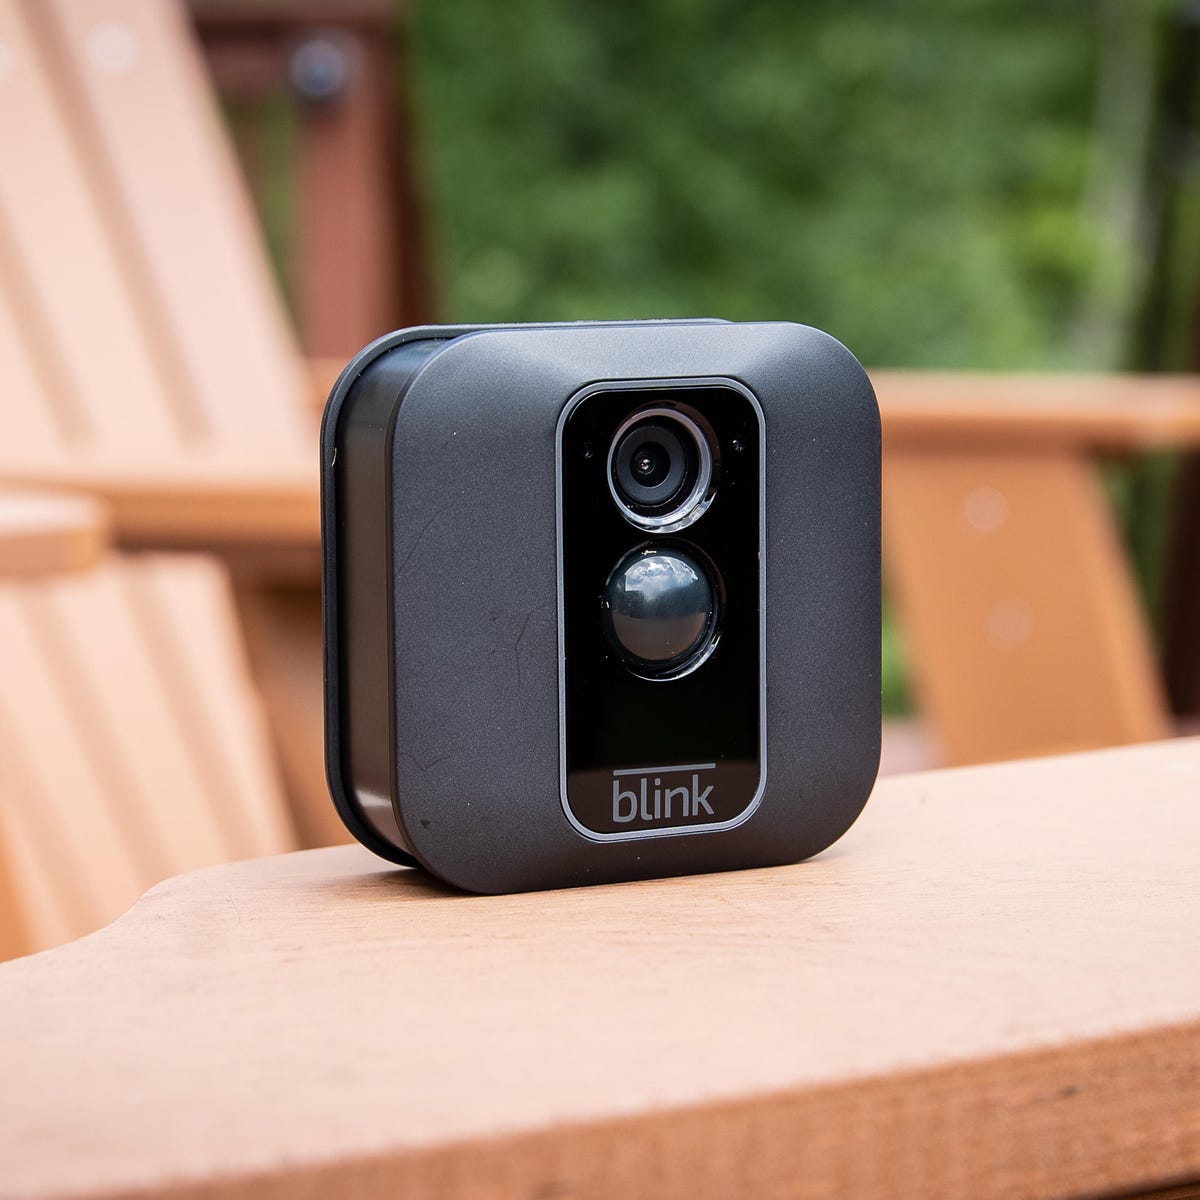 These battery-powered security cameras keep watch without the